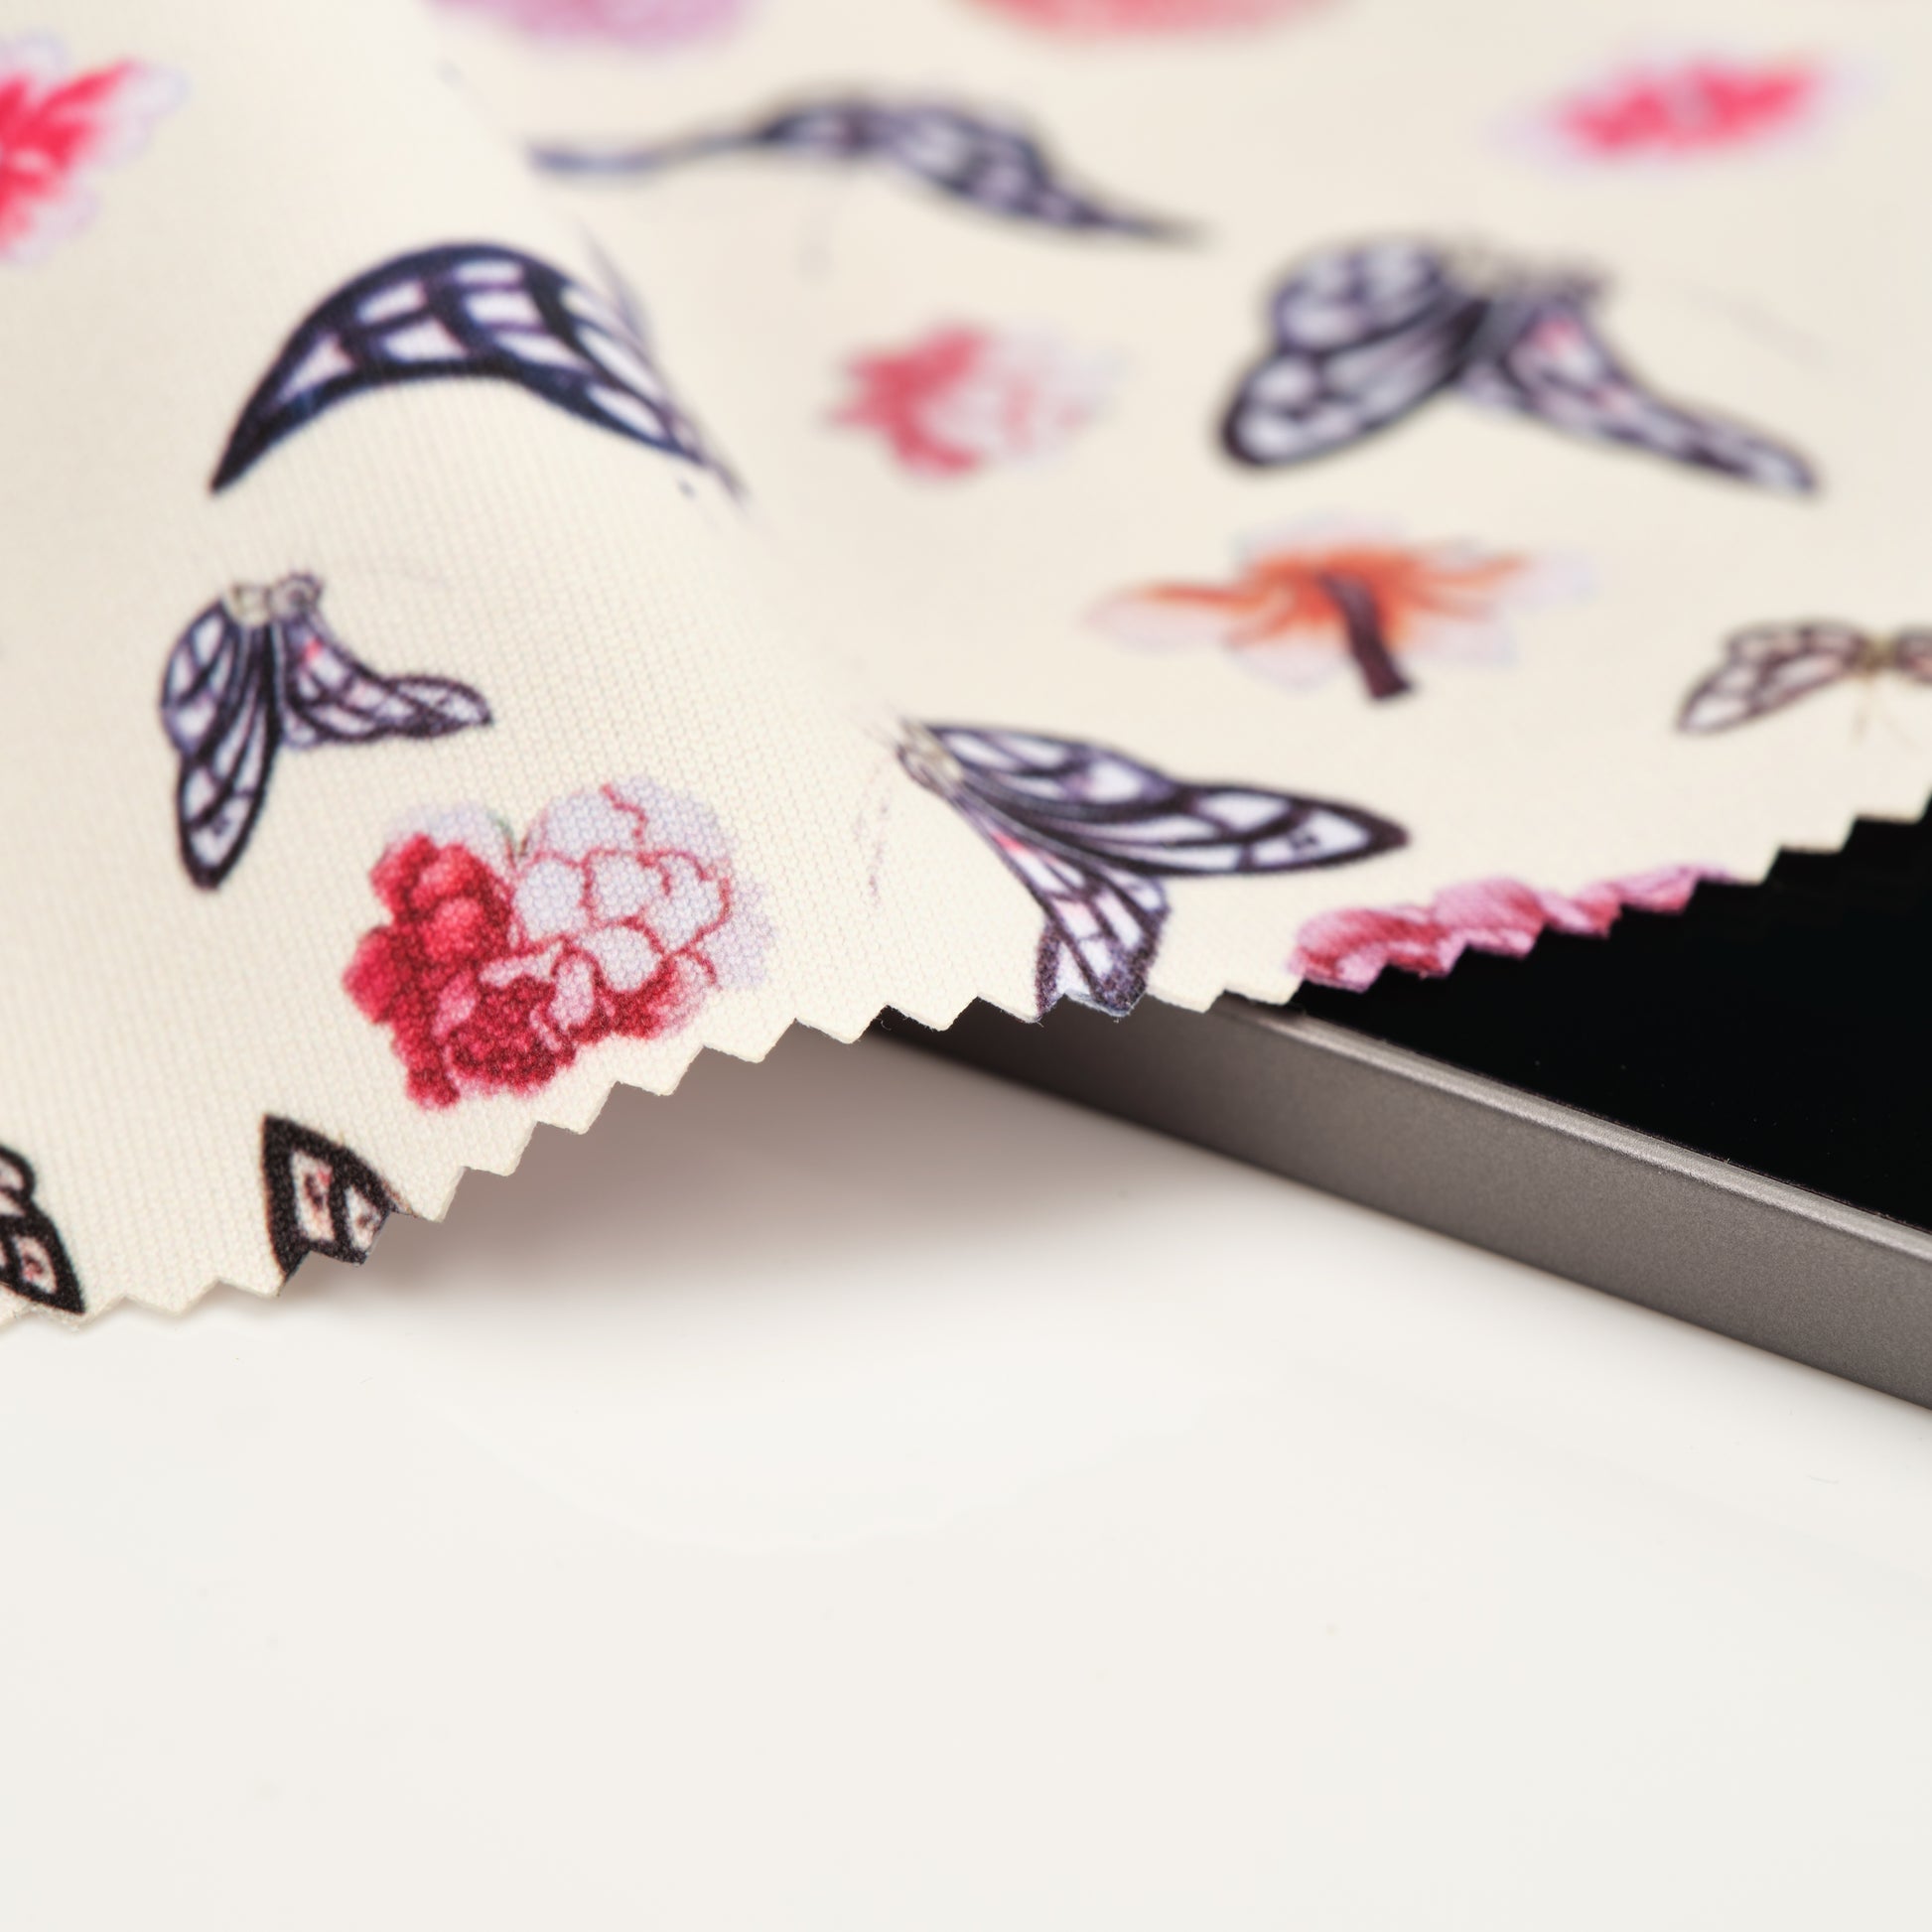 A close up of the lens cloth showing detail of the design and high quality edging. The cloth design features butterflies and pink flowers on a light background. 